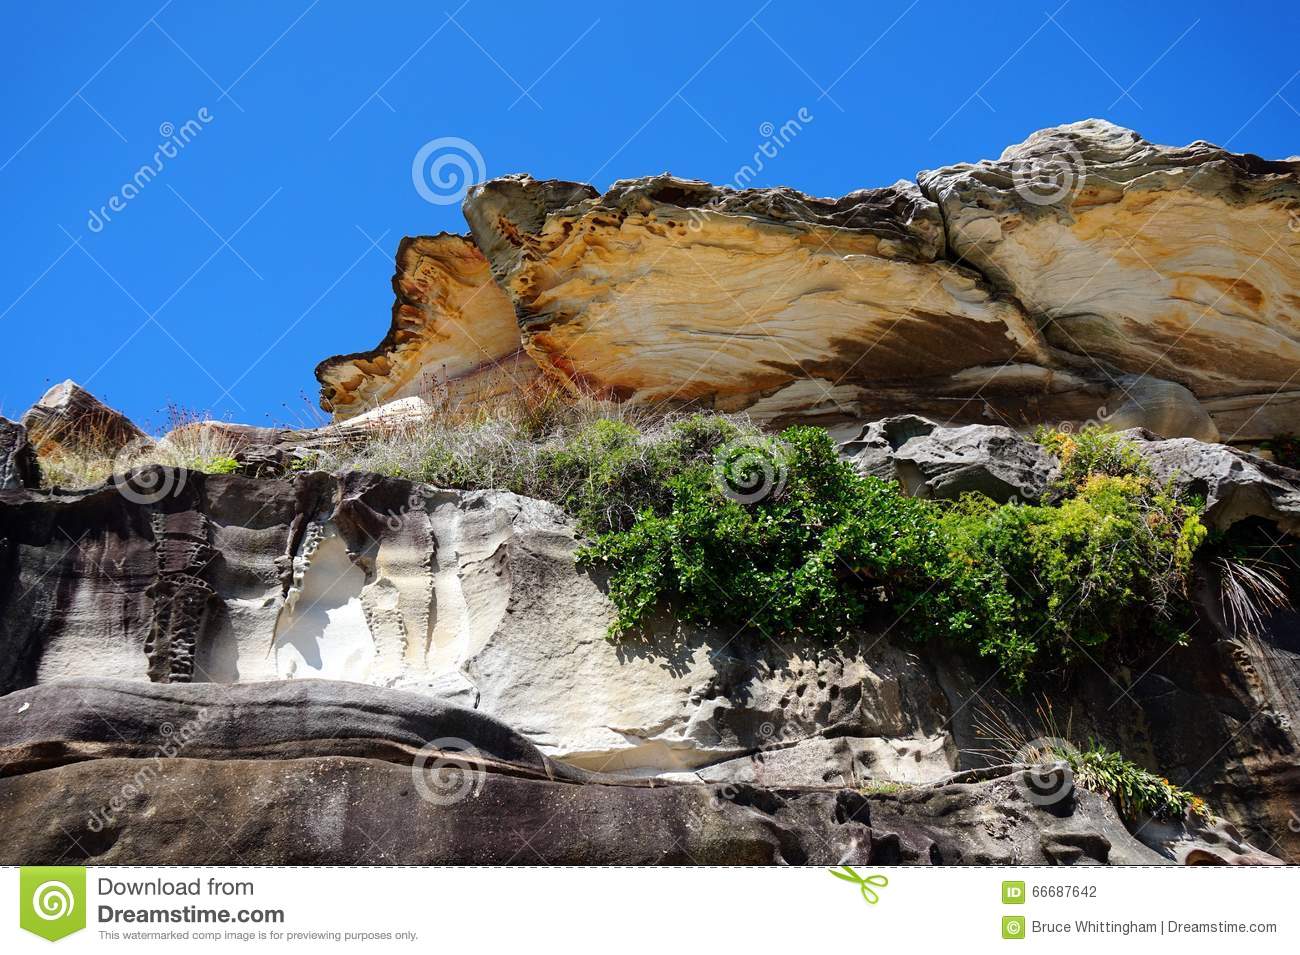 Side Sandstone Cliffs And Rocks Weathered By Wind And Water Erosion